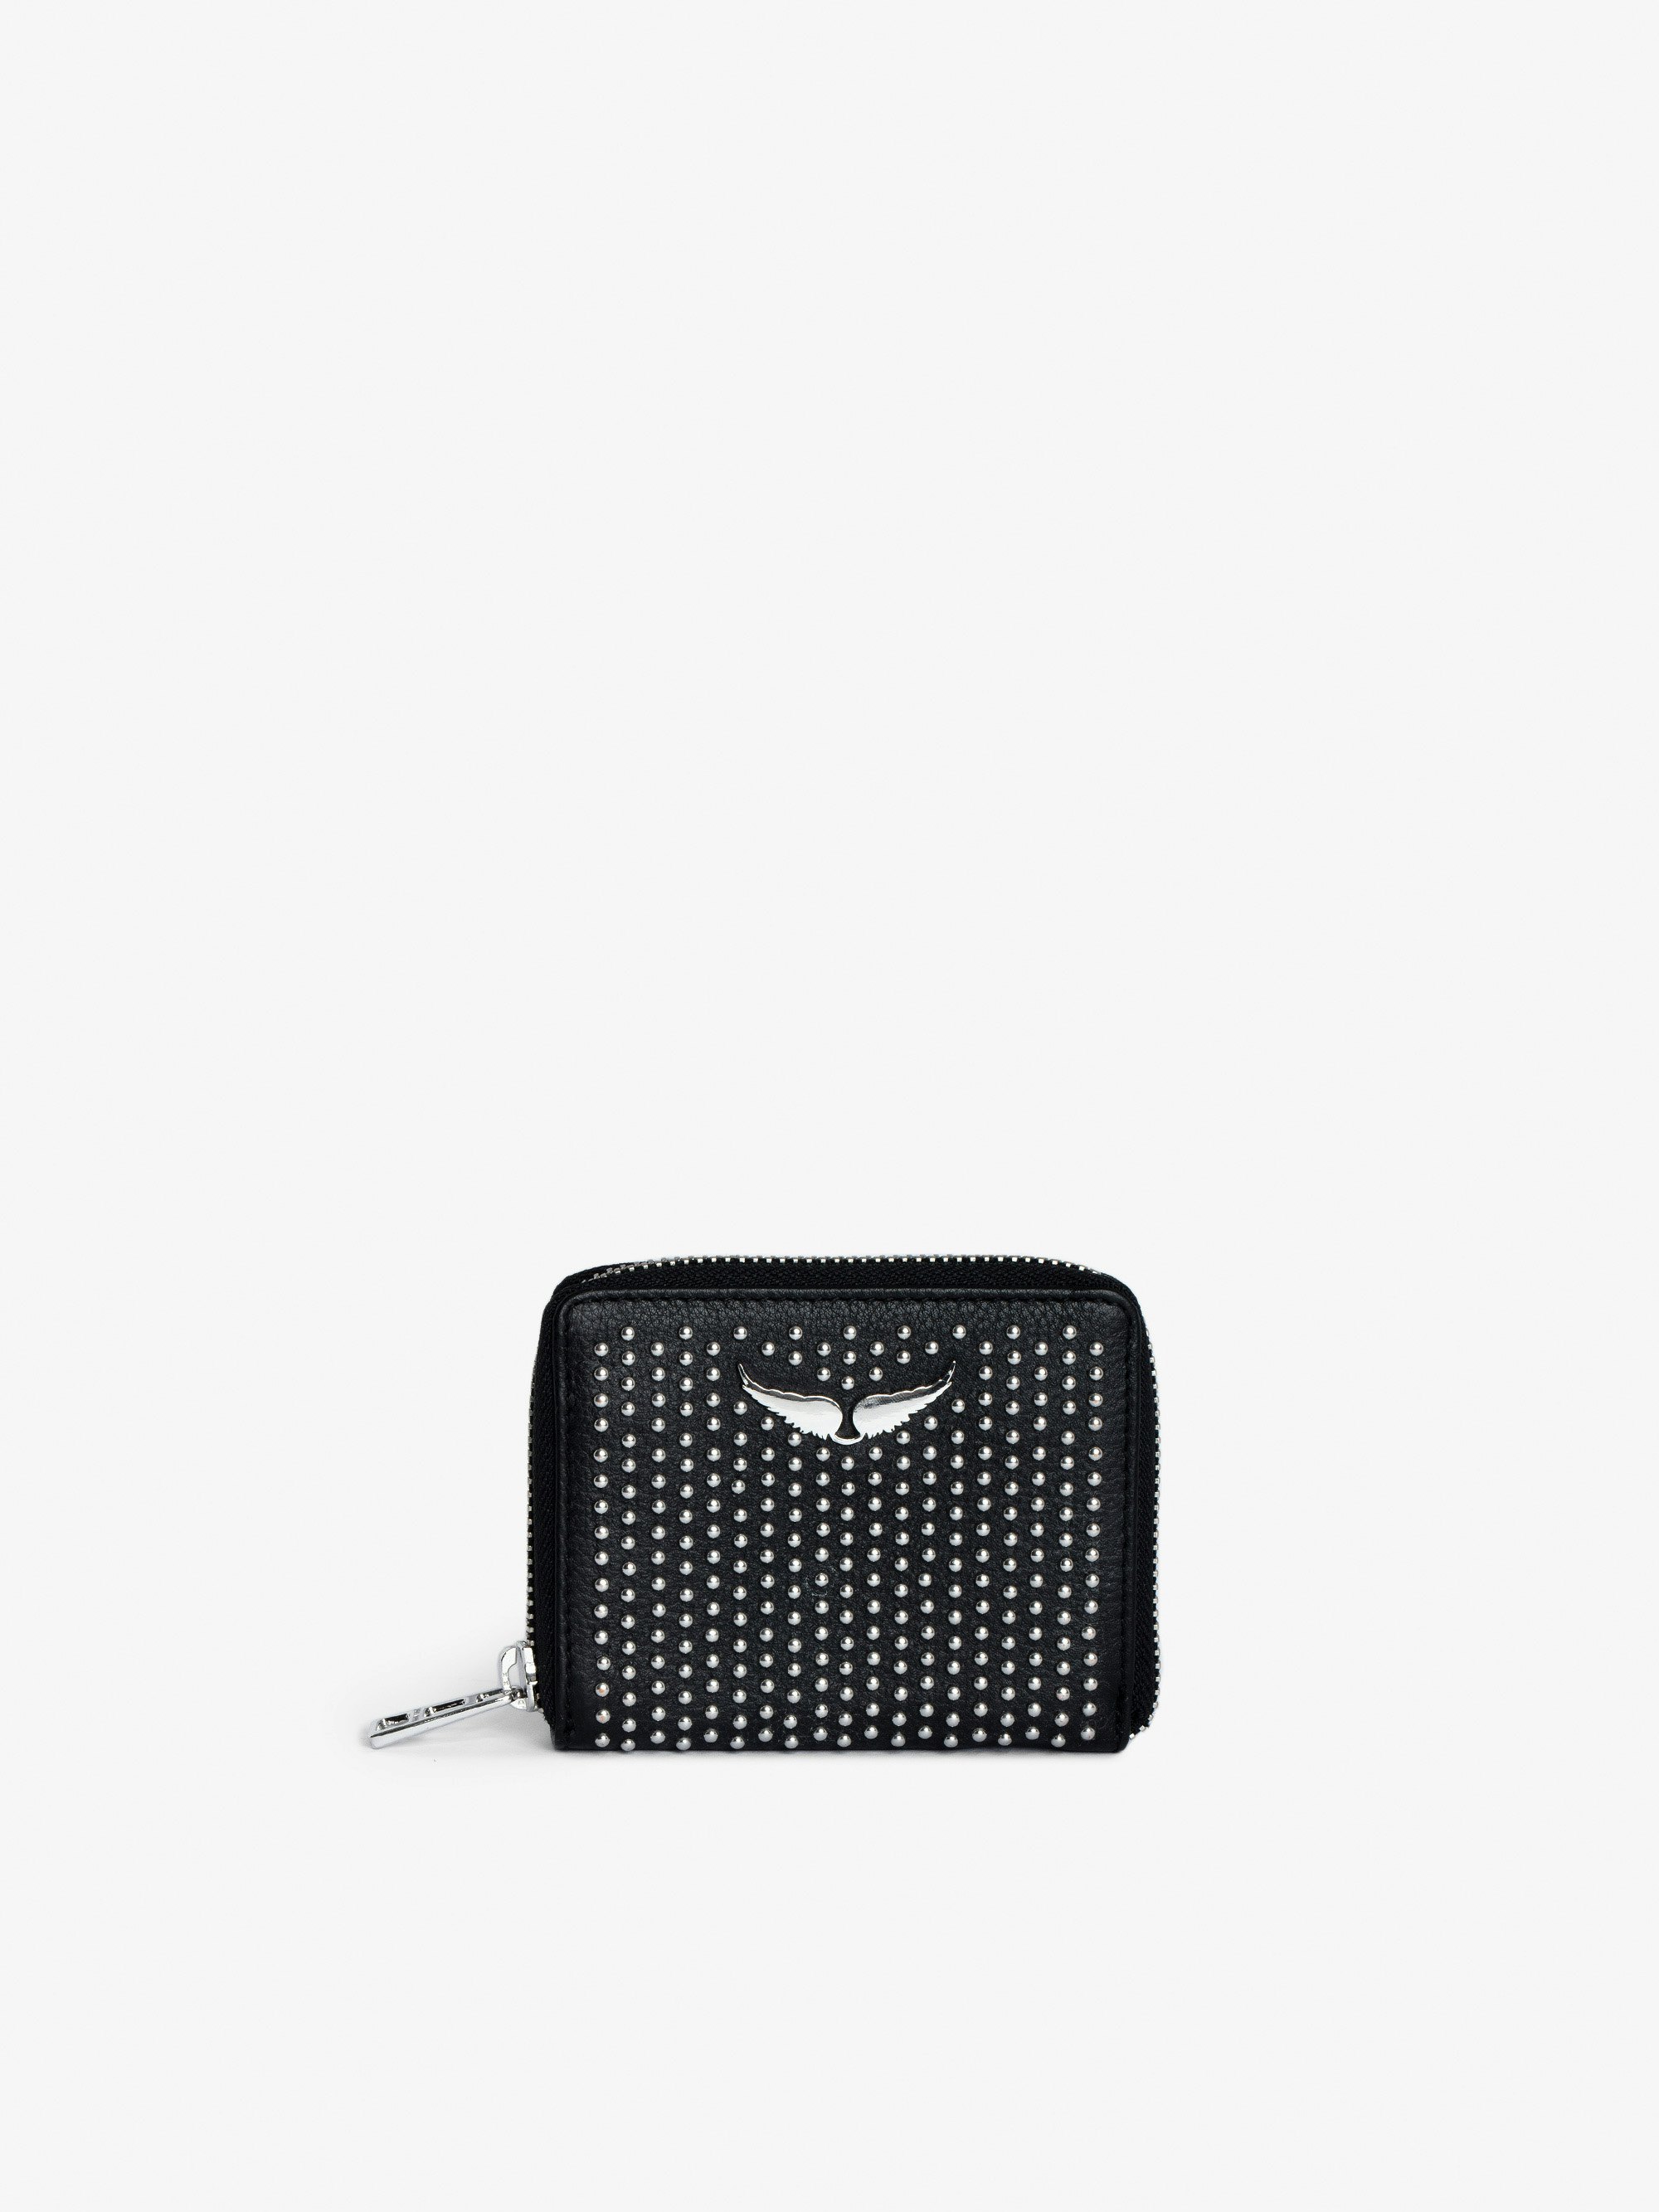 Mini ZV Dotted Swiss Coin Purse - Women’s black grained leather wallet with studs and wings charm.